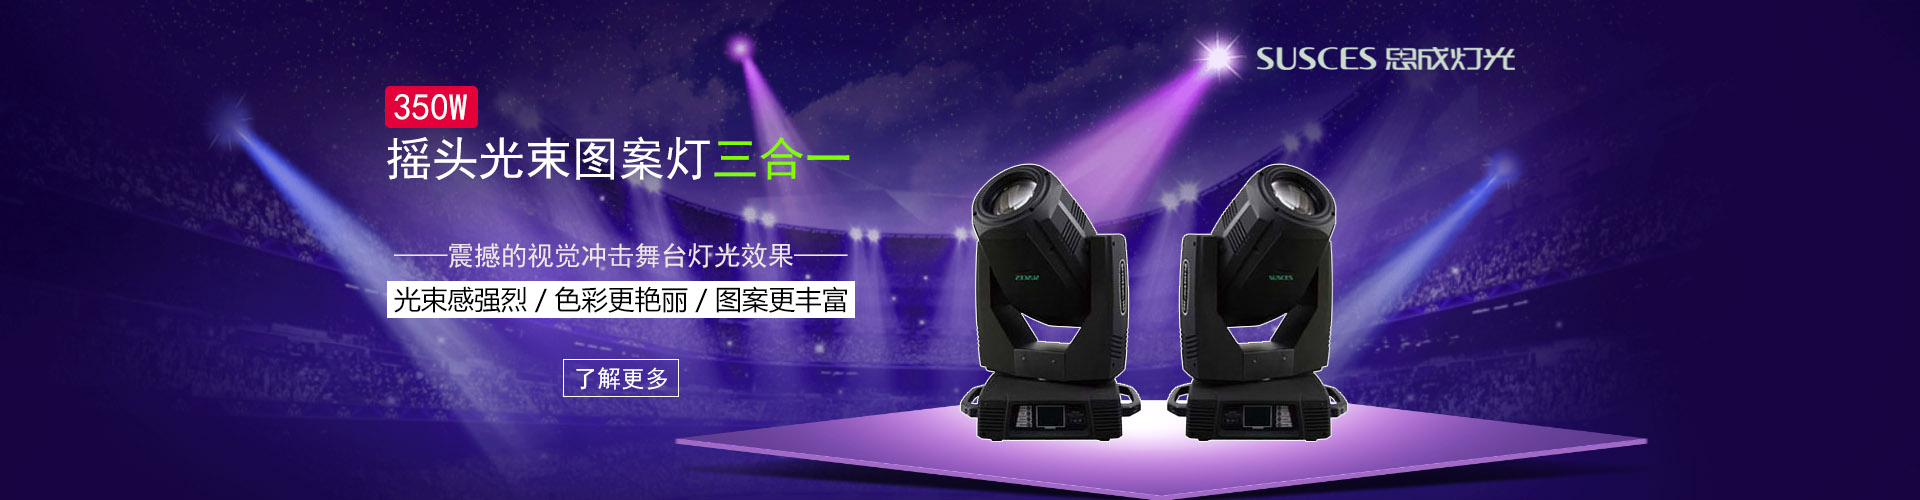 sicheng Stagelight 17R beam&pattern moving head light